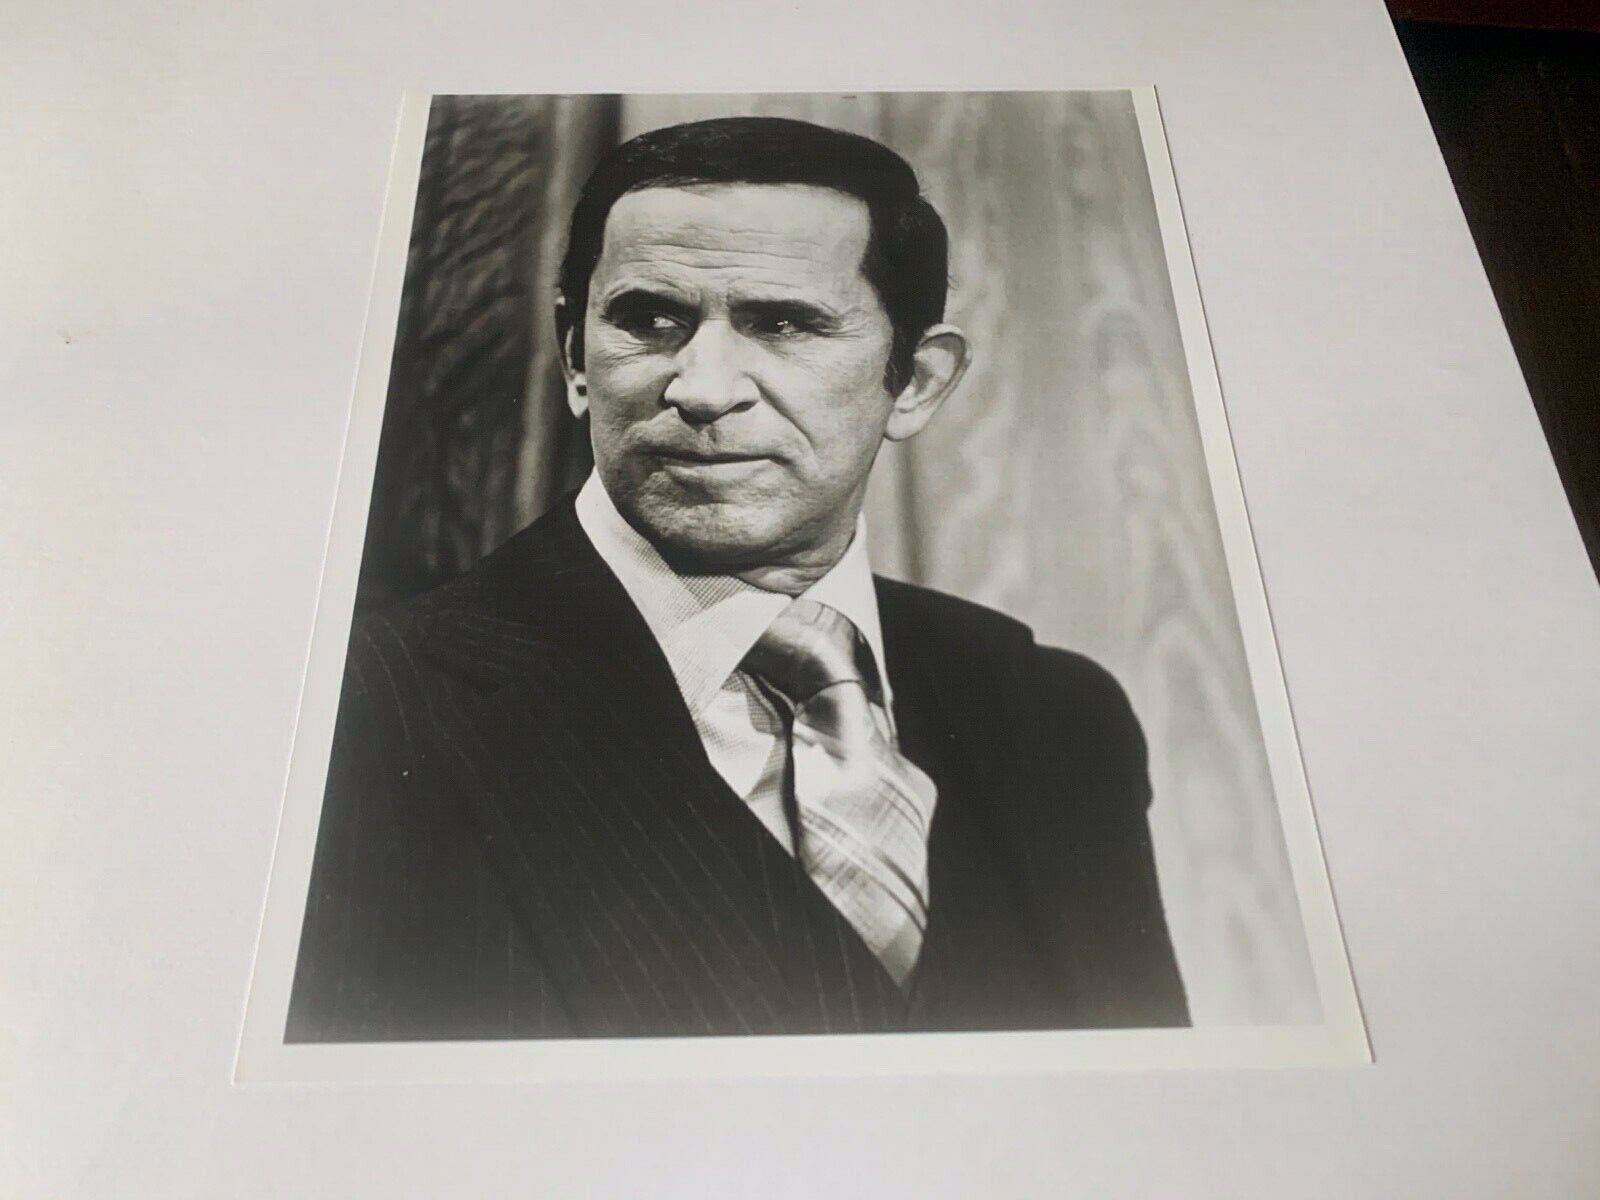 Don Adams Unsigned Vintage Publicity 8x10 Black and White Celebrity Photo